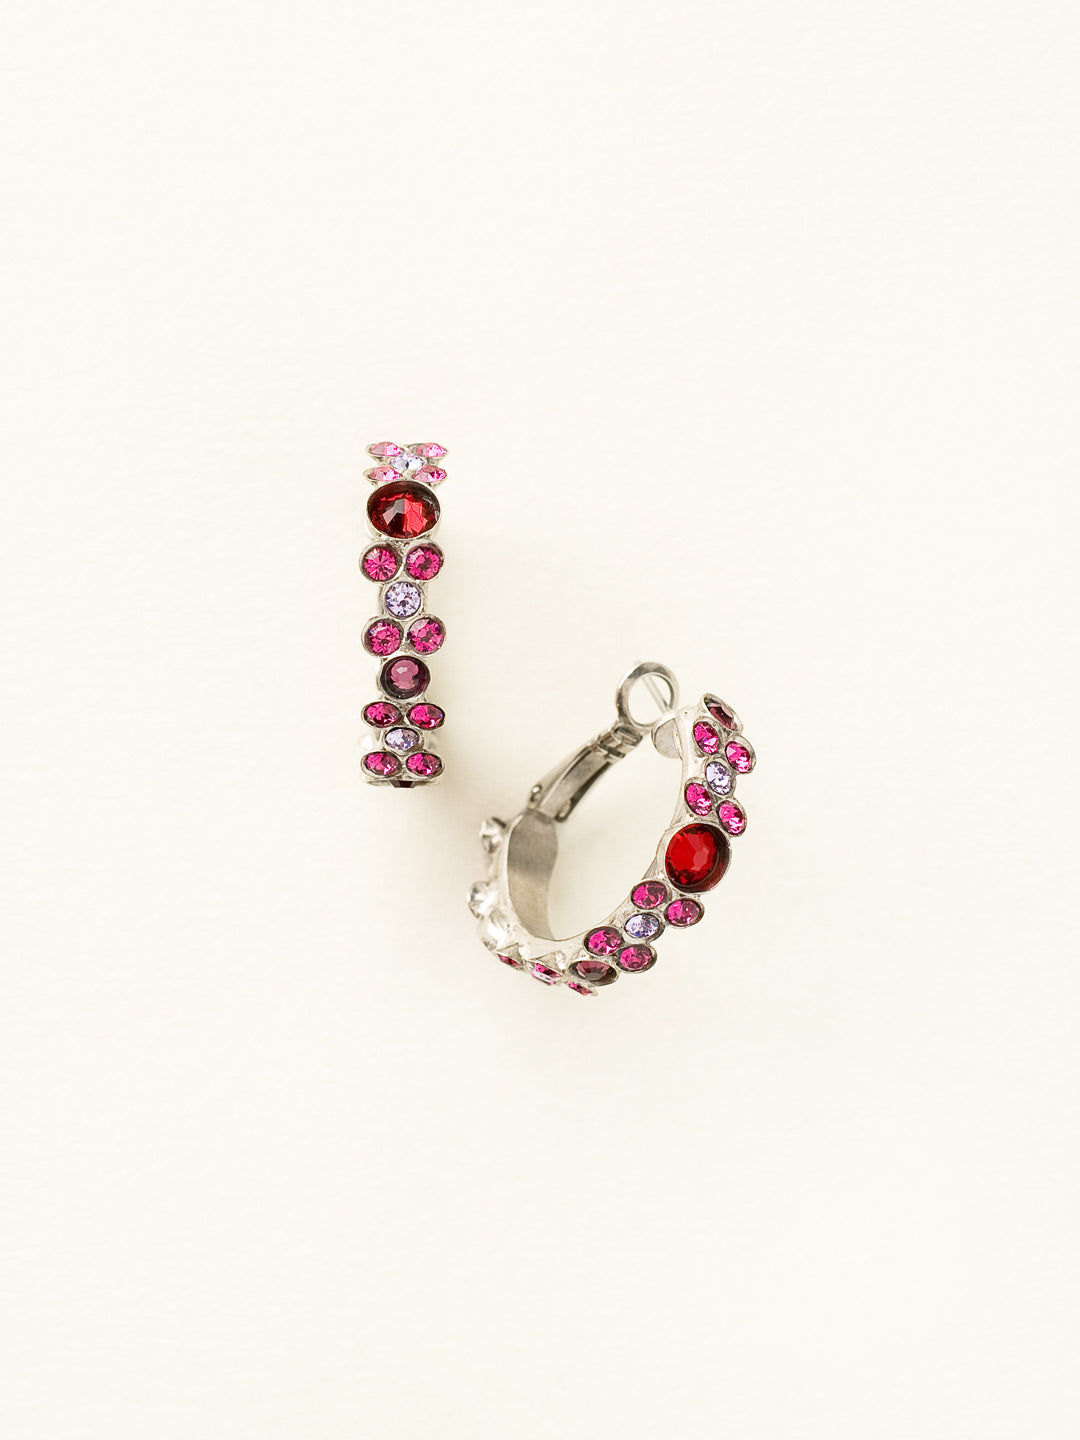 Floral Hoop Earrings - EBP15ASPR - <p>Intricate design, infused with gorgeous shine. A motif of floral clusters is featured here on a small, delicate hoop with a hinged post backing. From Sorrelli's Pink Ruby collection in our Antique Silver-tone finish.</p>